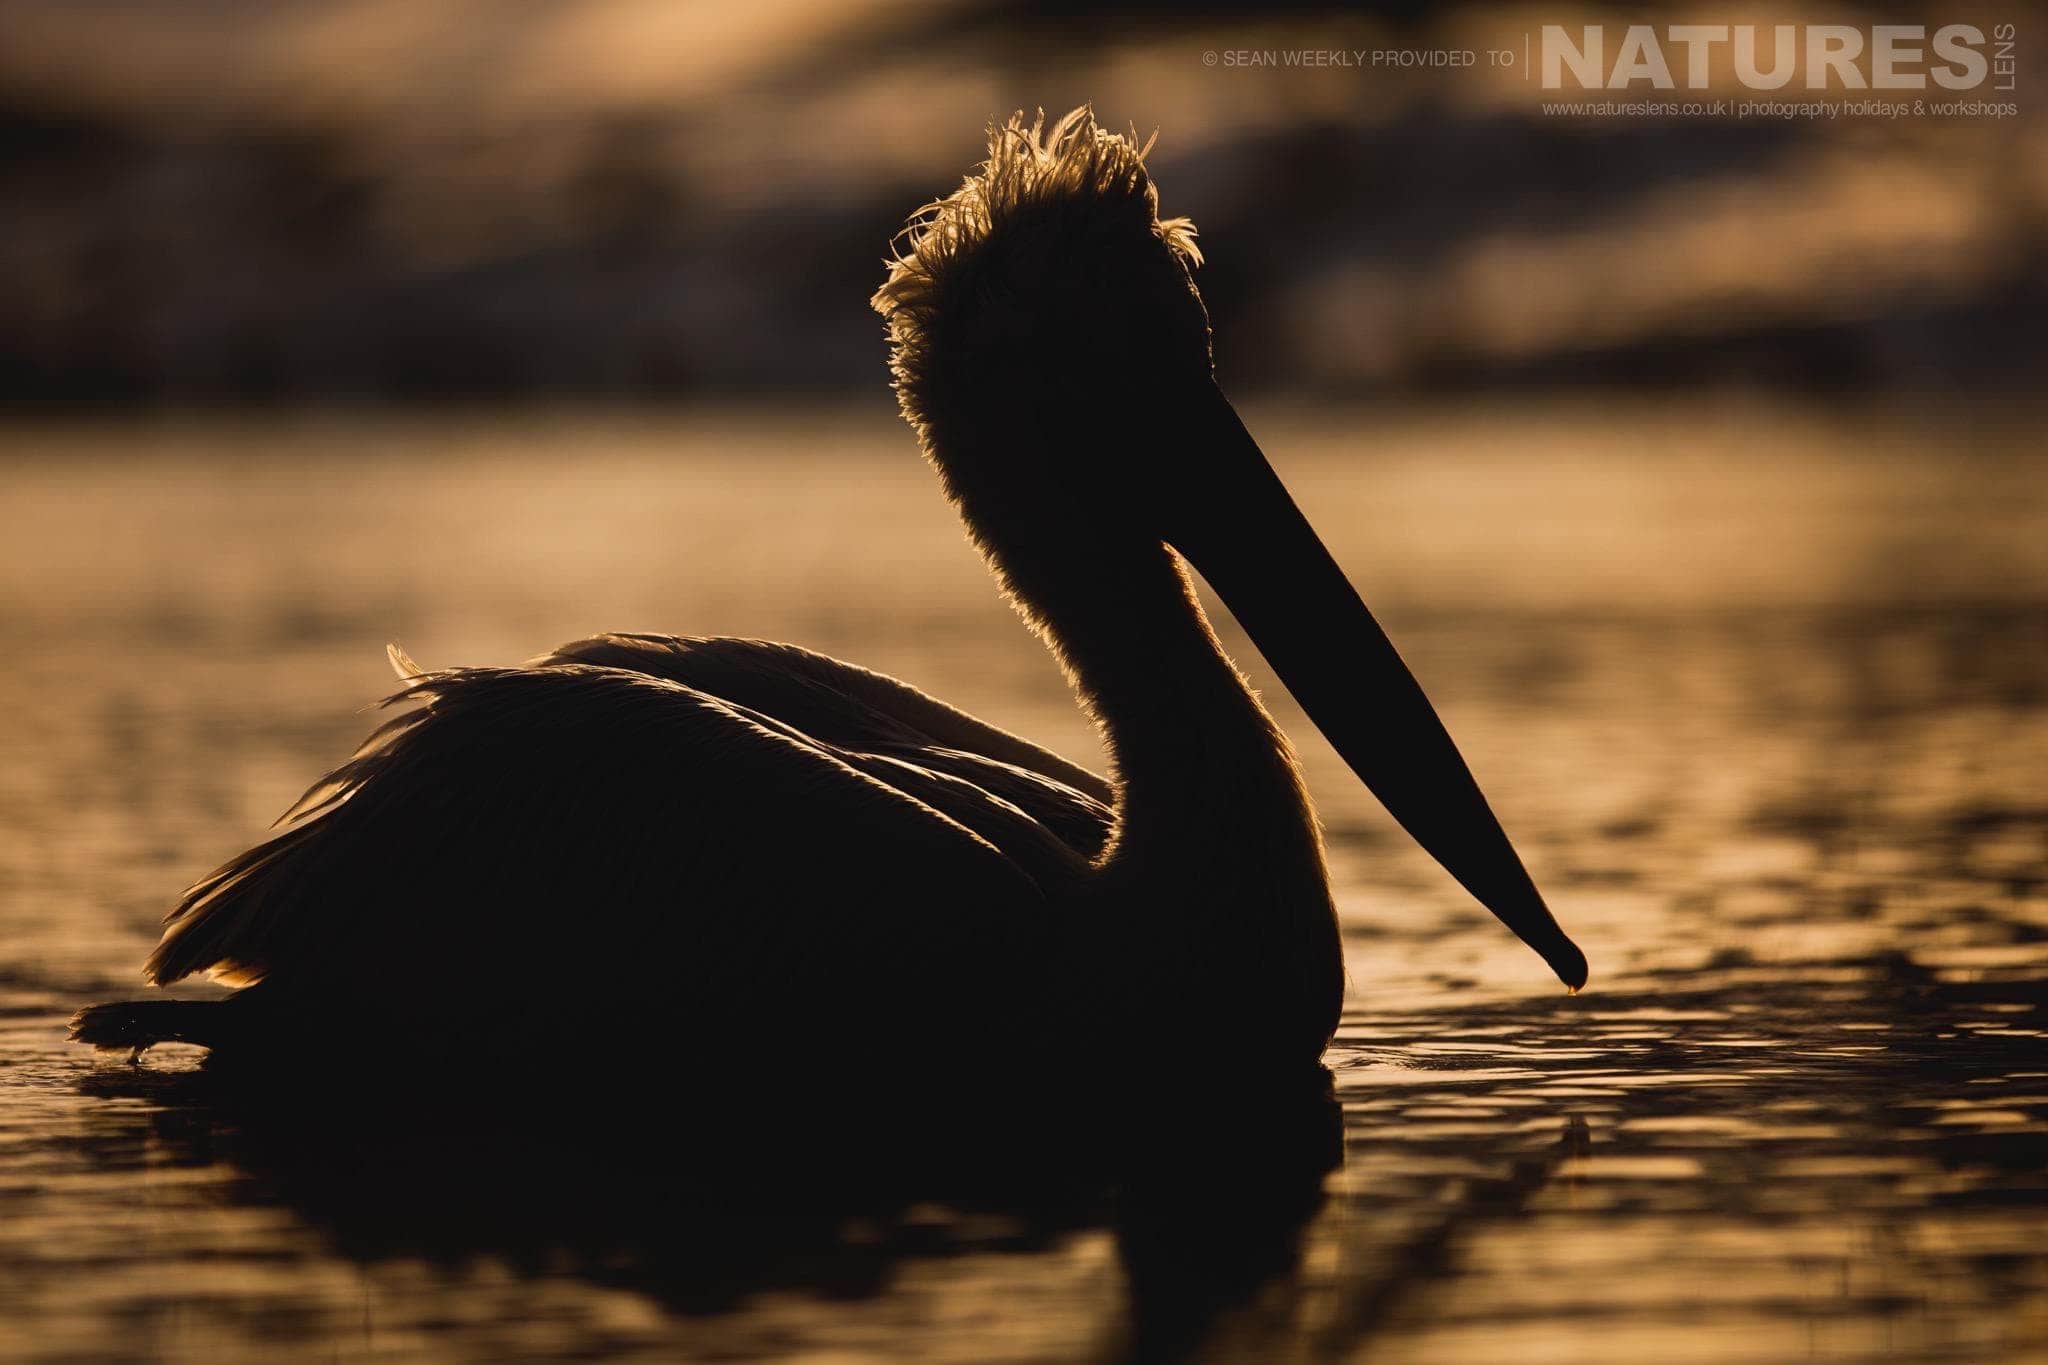 A Dalmatian Pelican captured at sunrise photographed on the NaturesLens Dalmatian Pelicans Photography Holiday